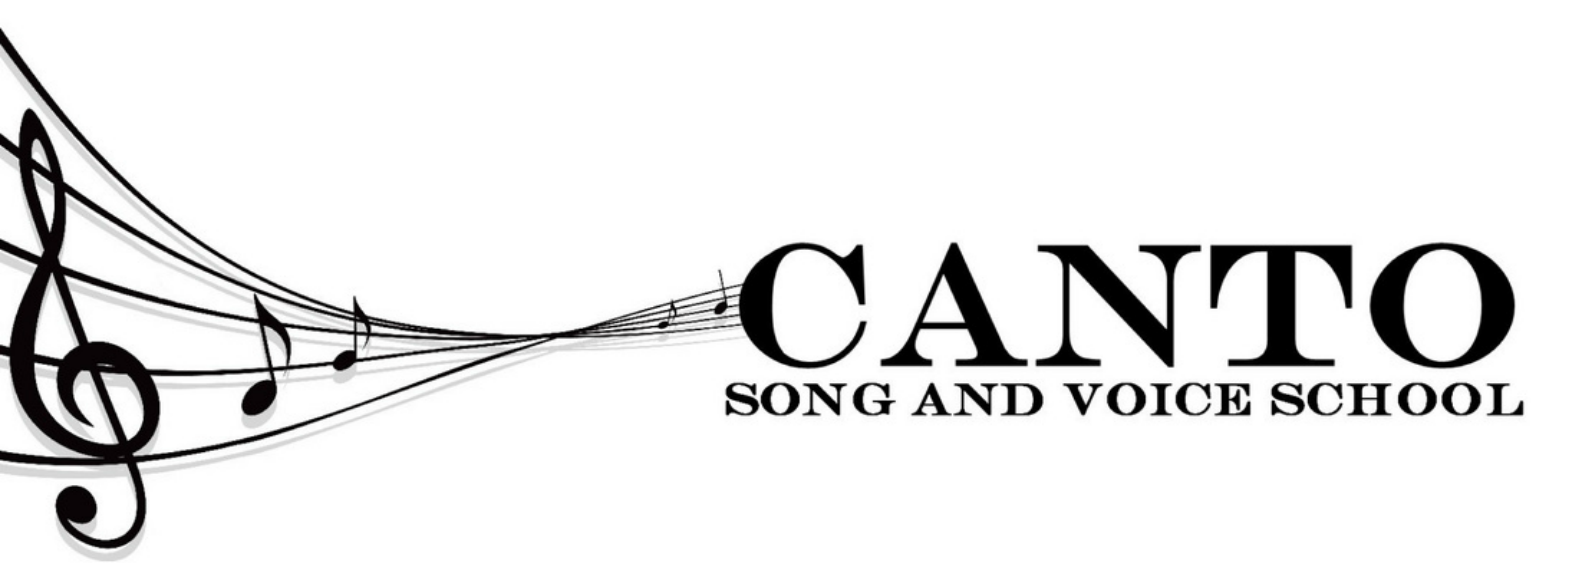 Canto Song and Voice School